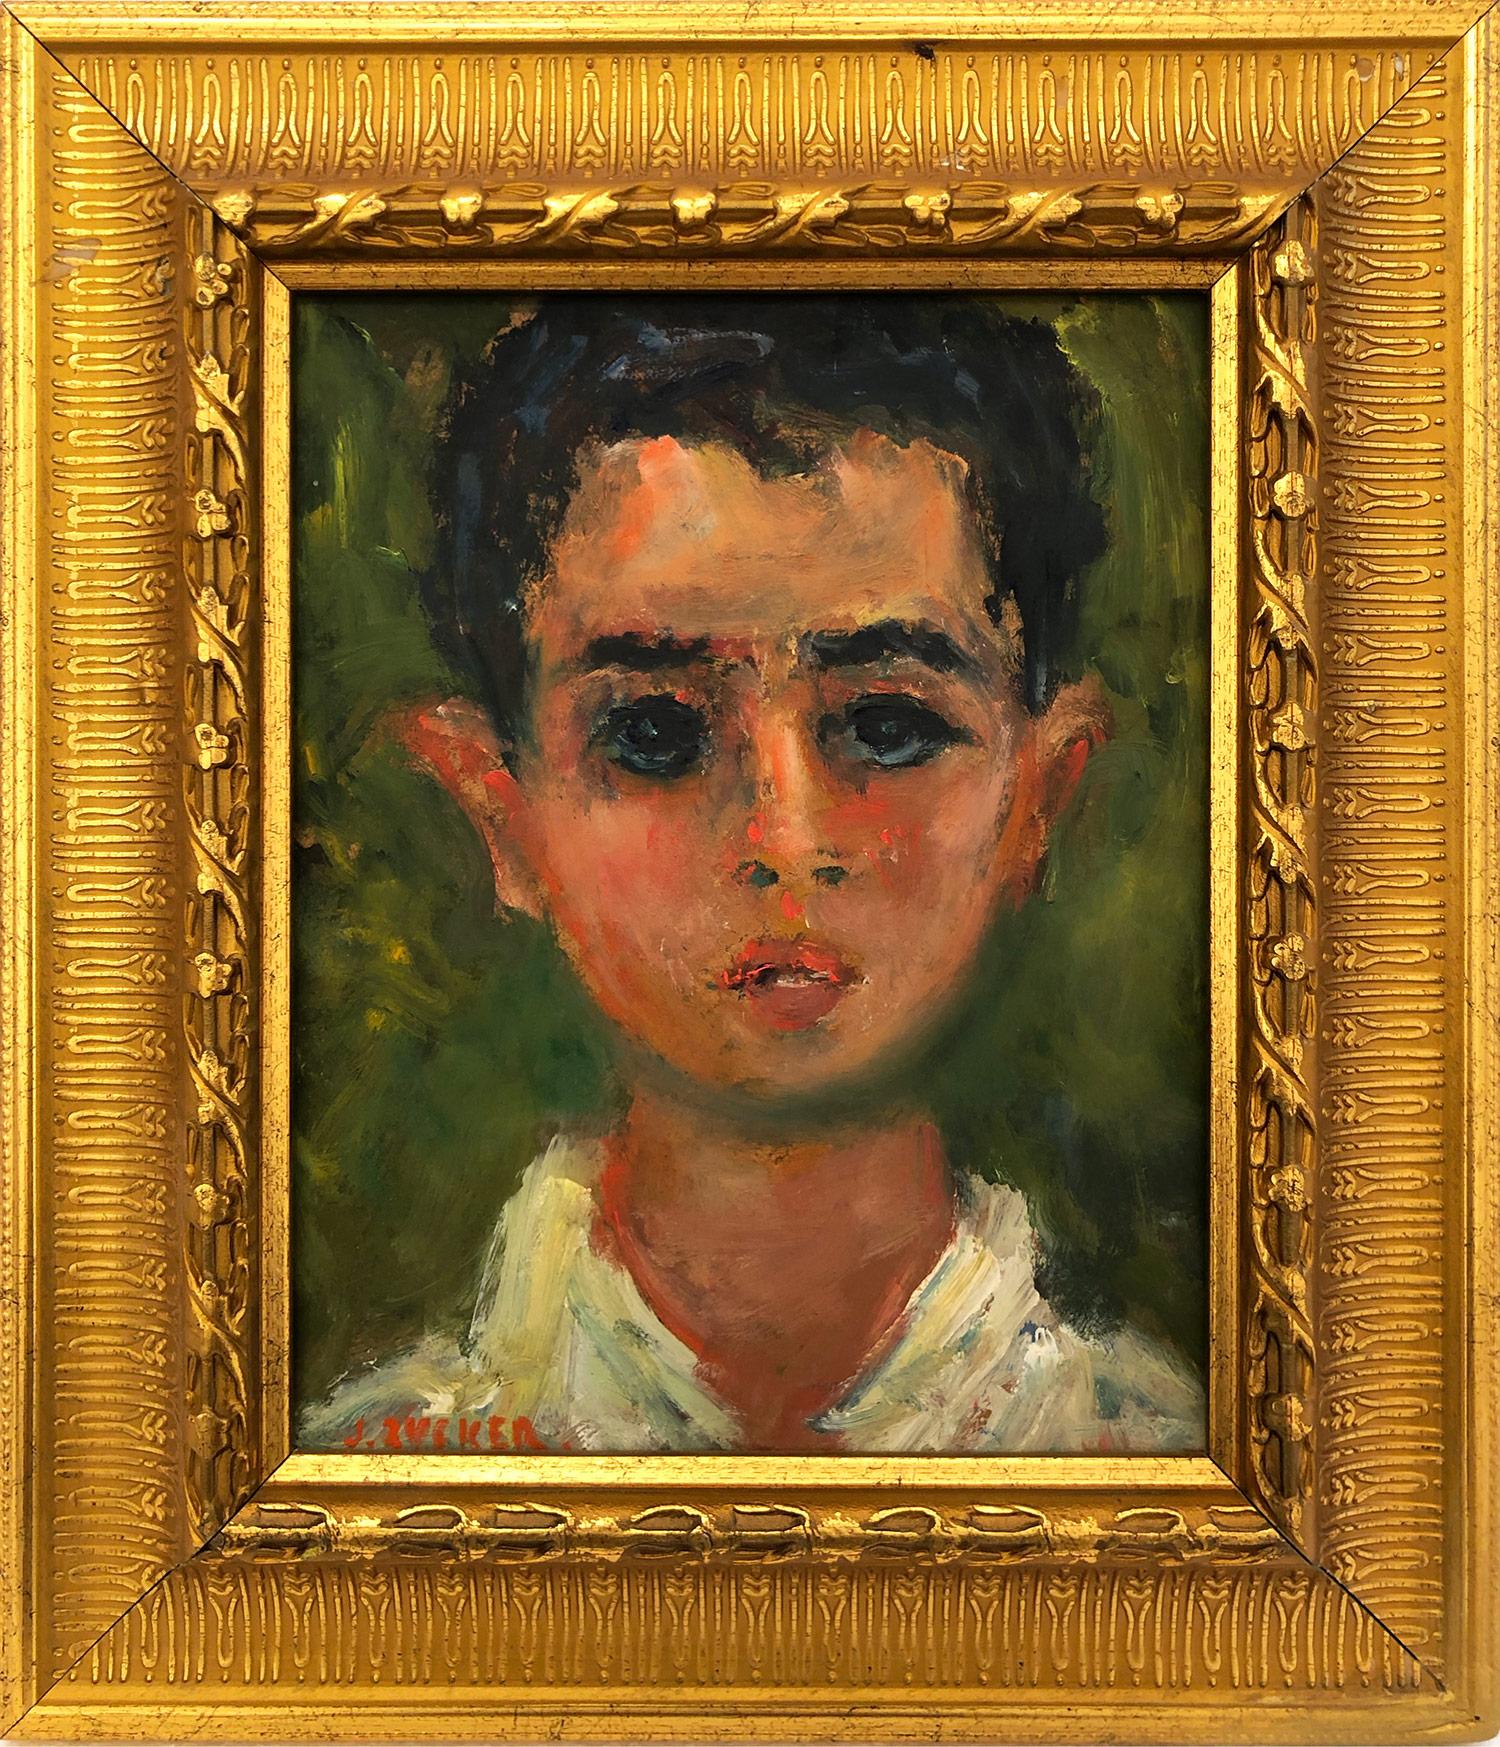 Jacques Zucker Portrait Painting - "Portrait of a Young Boy" Post-Impressionism French Oil Painting on Panel